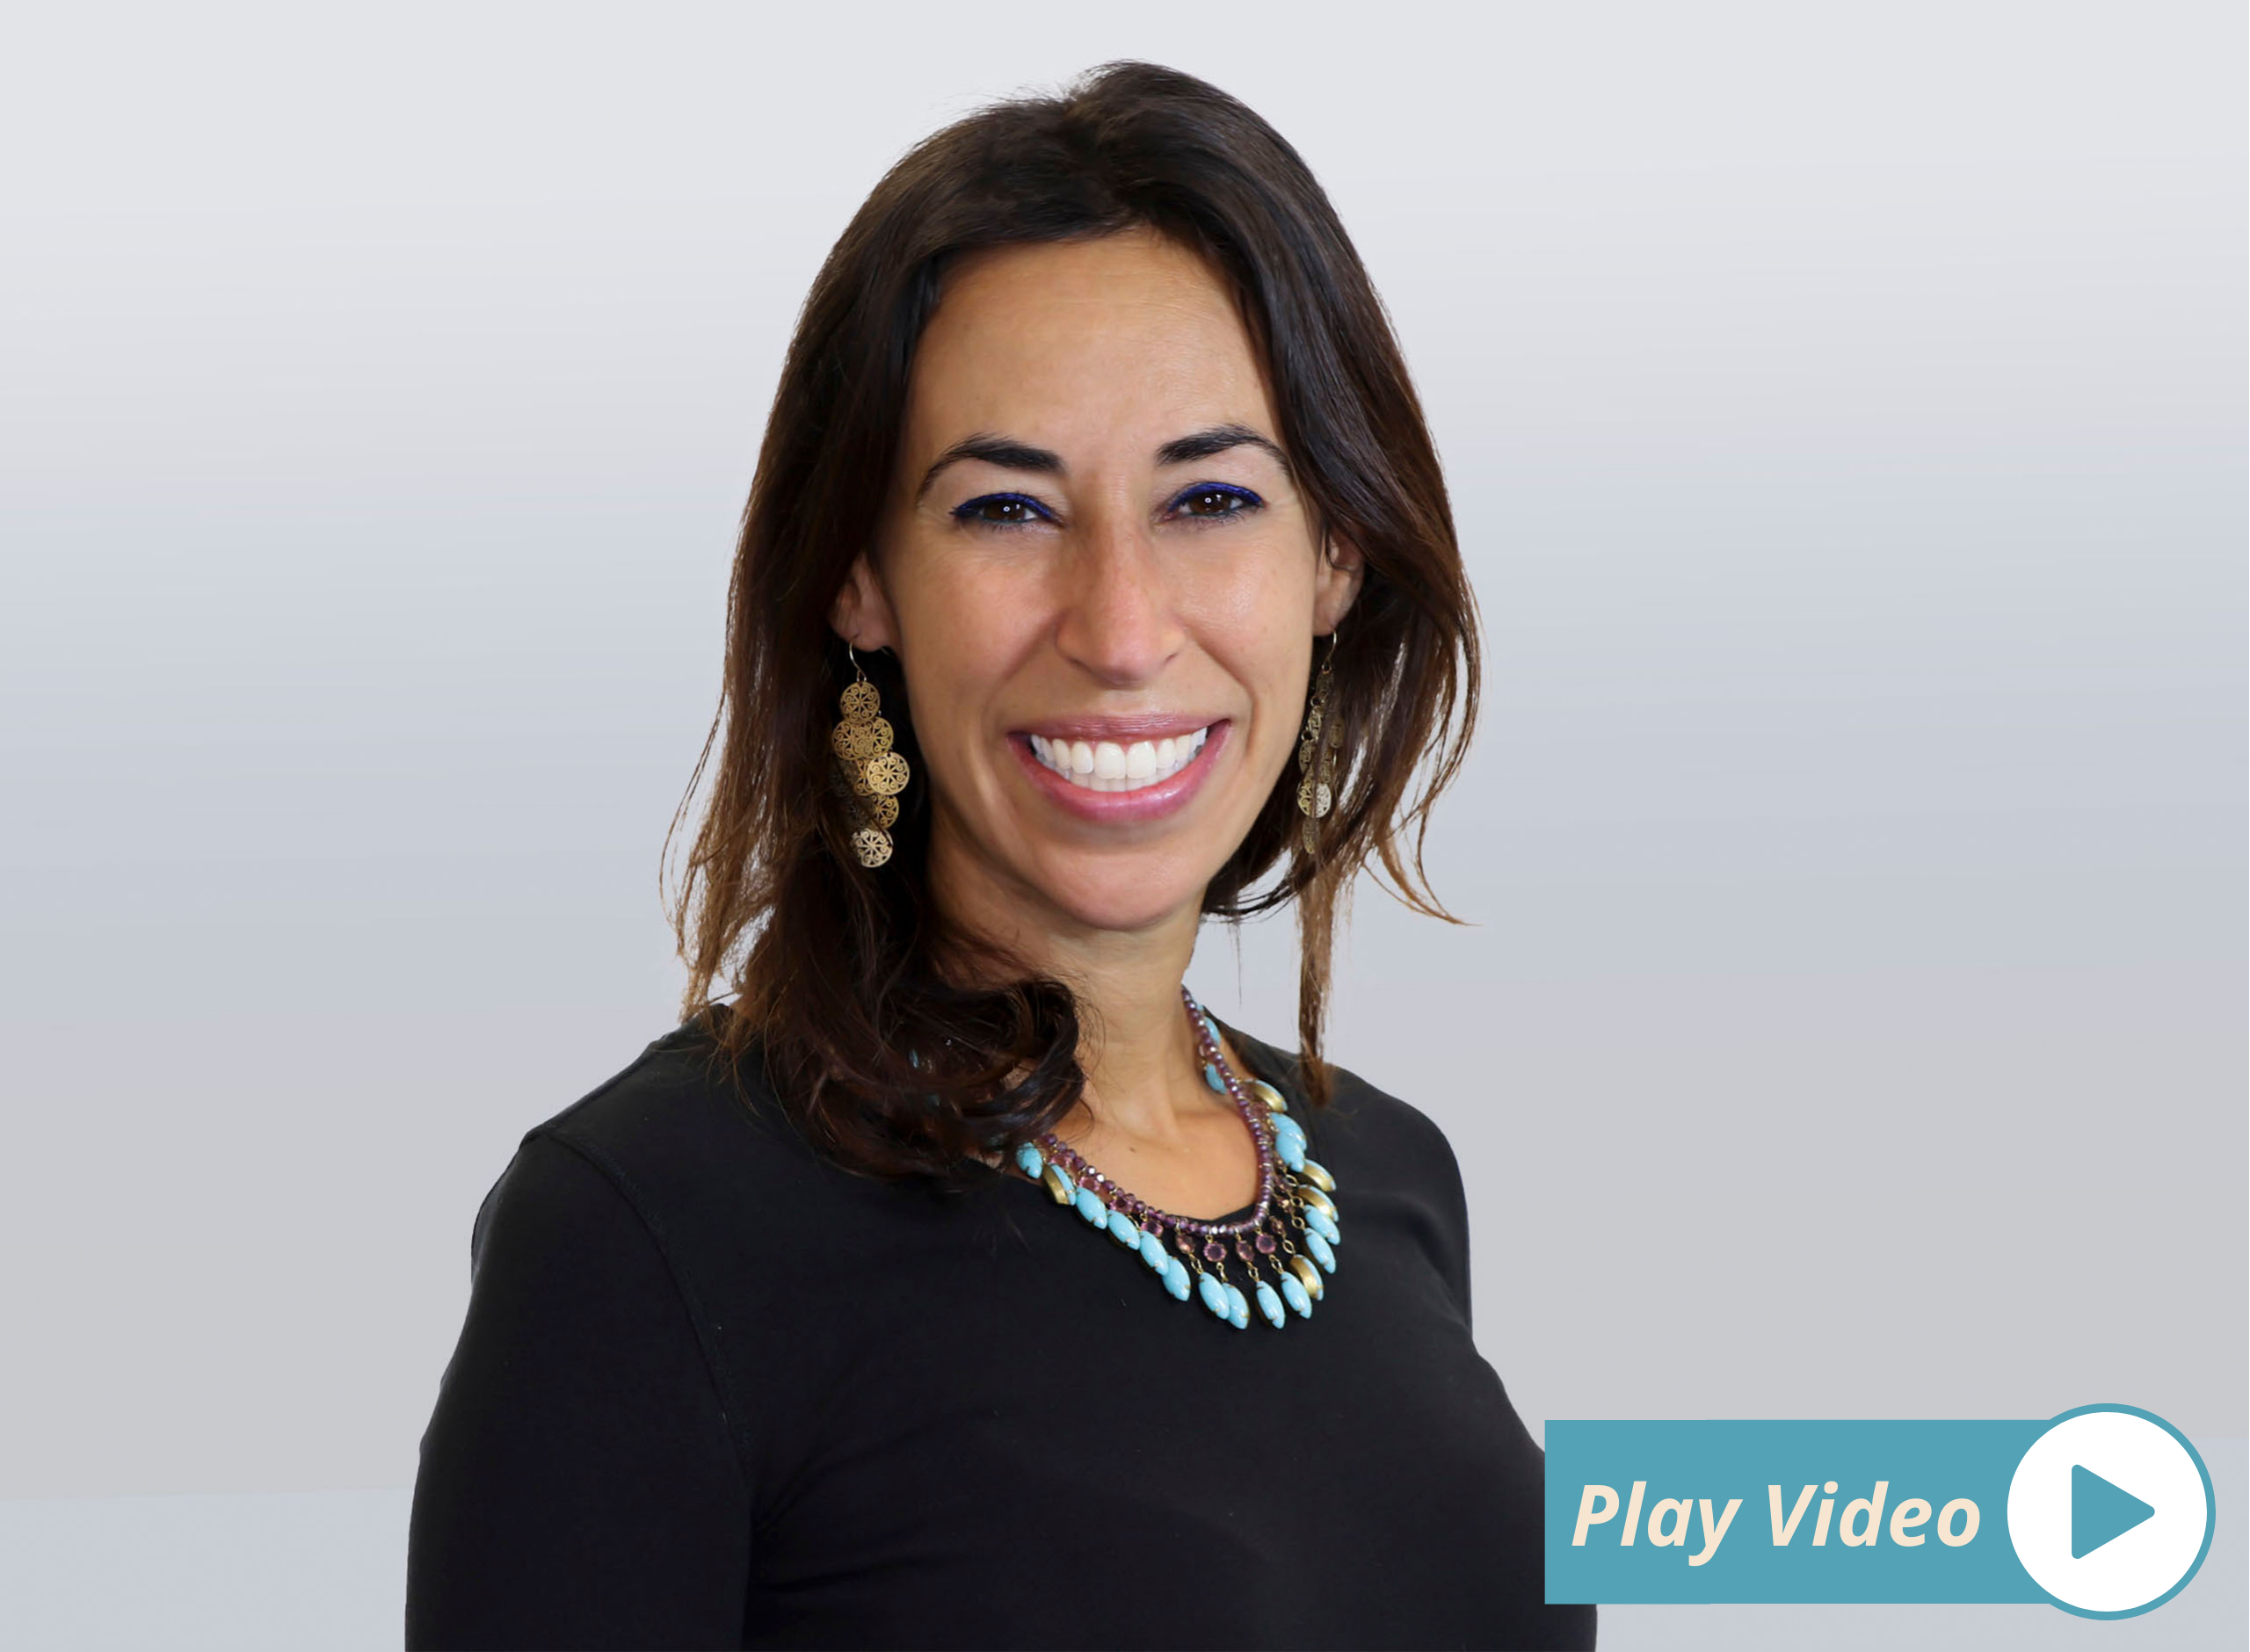 Jaclyn Brottman, Vice President of Human Resources. Click to play a video introduction.